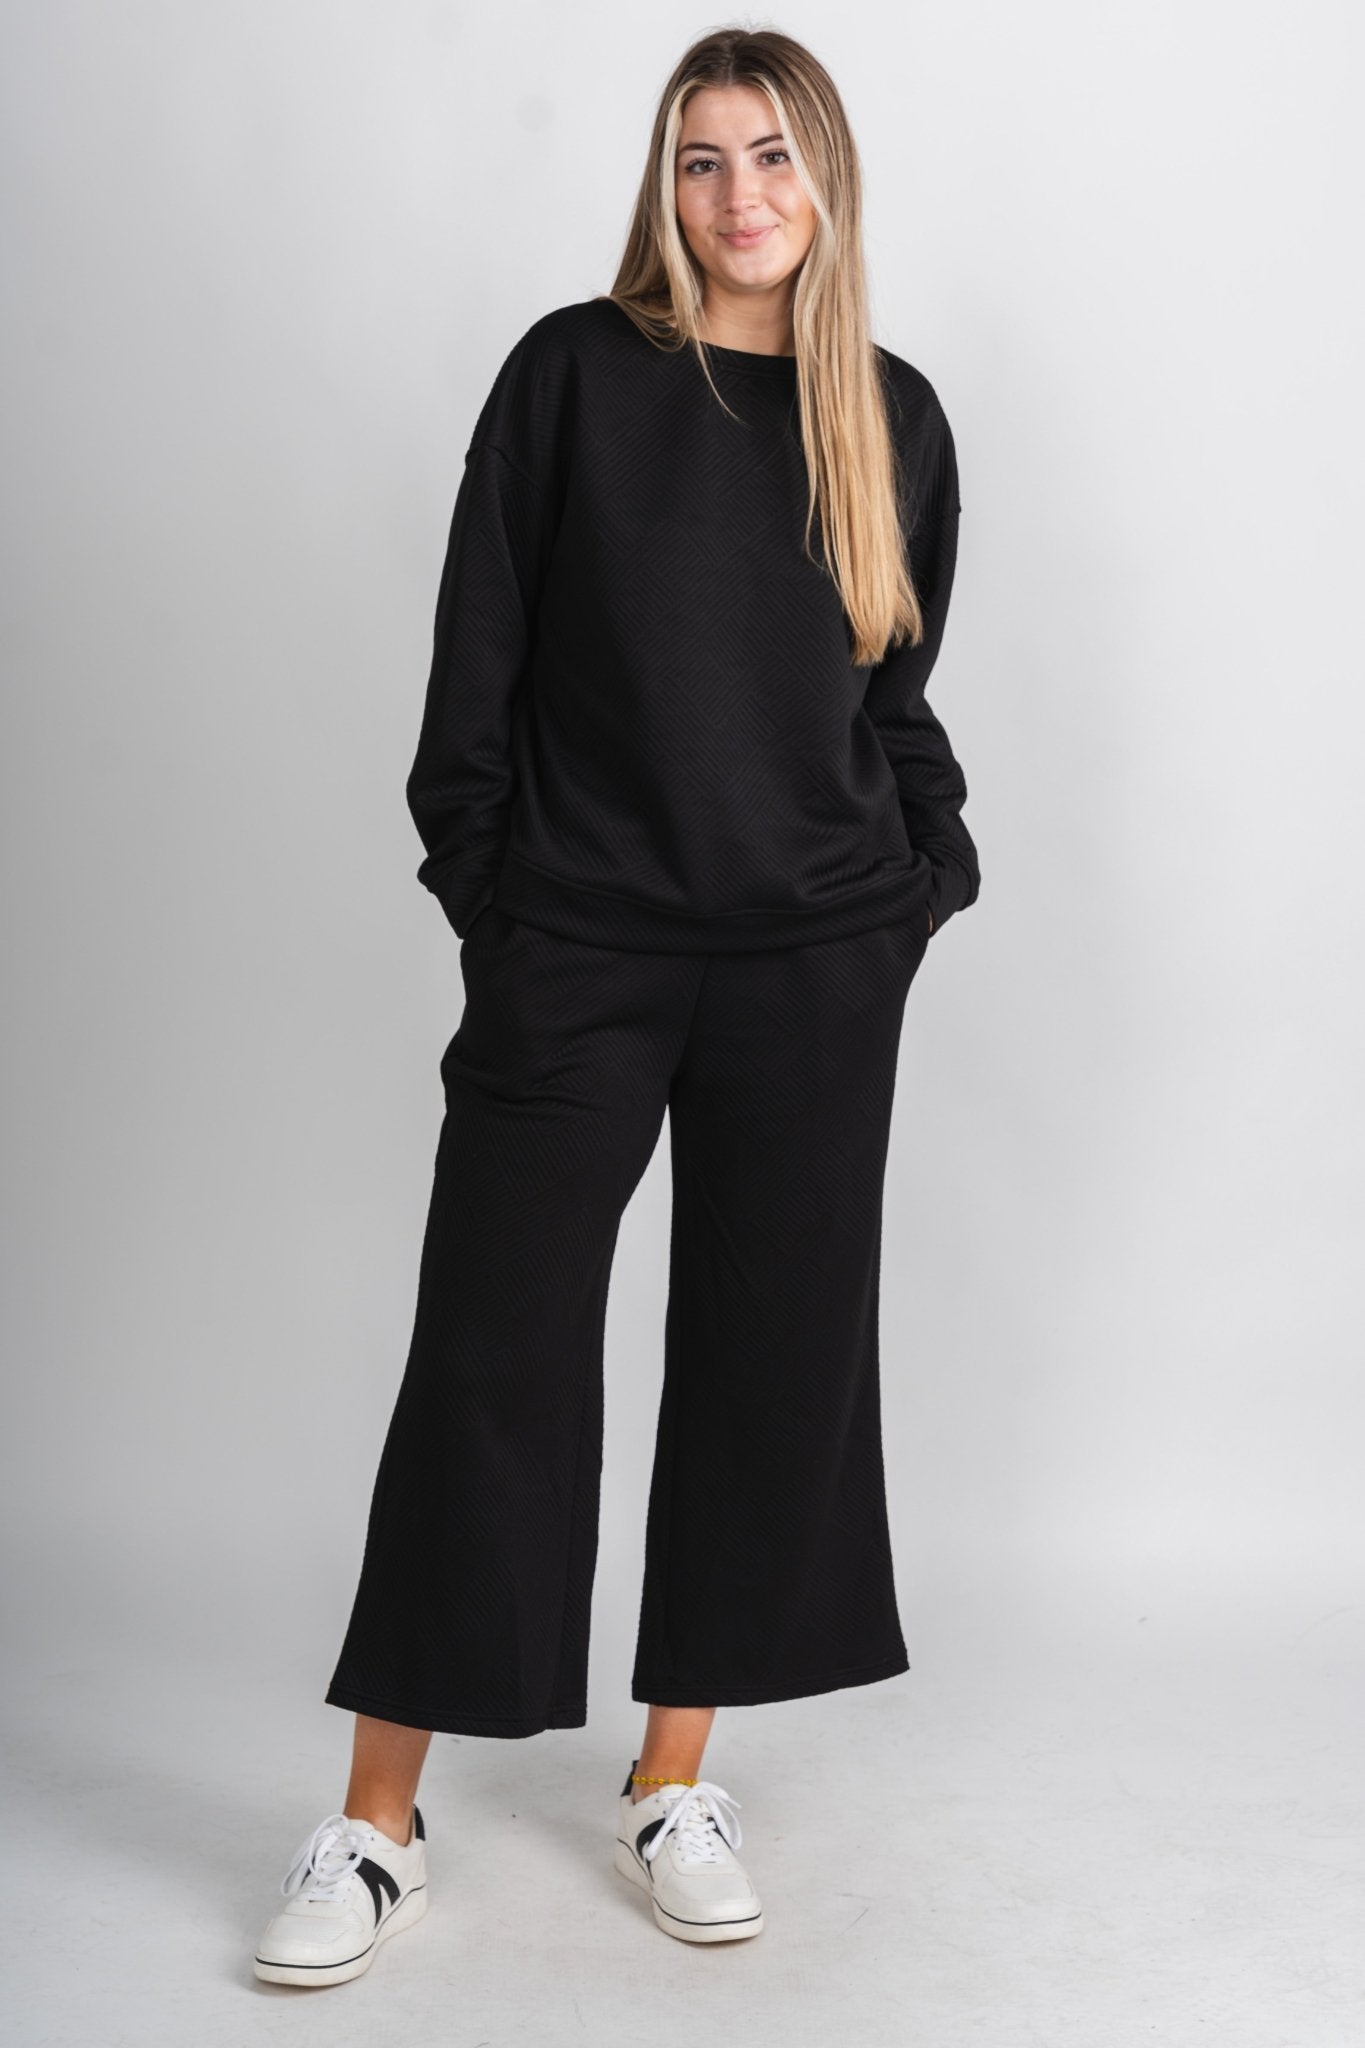 Textured long sleeve top black - Stylish Top - Trendy Lounge Sets at Lush Fashion Lounge Boutique in Oklahoma City